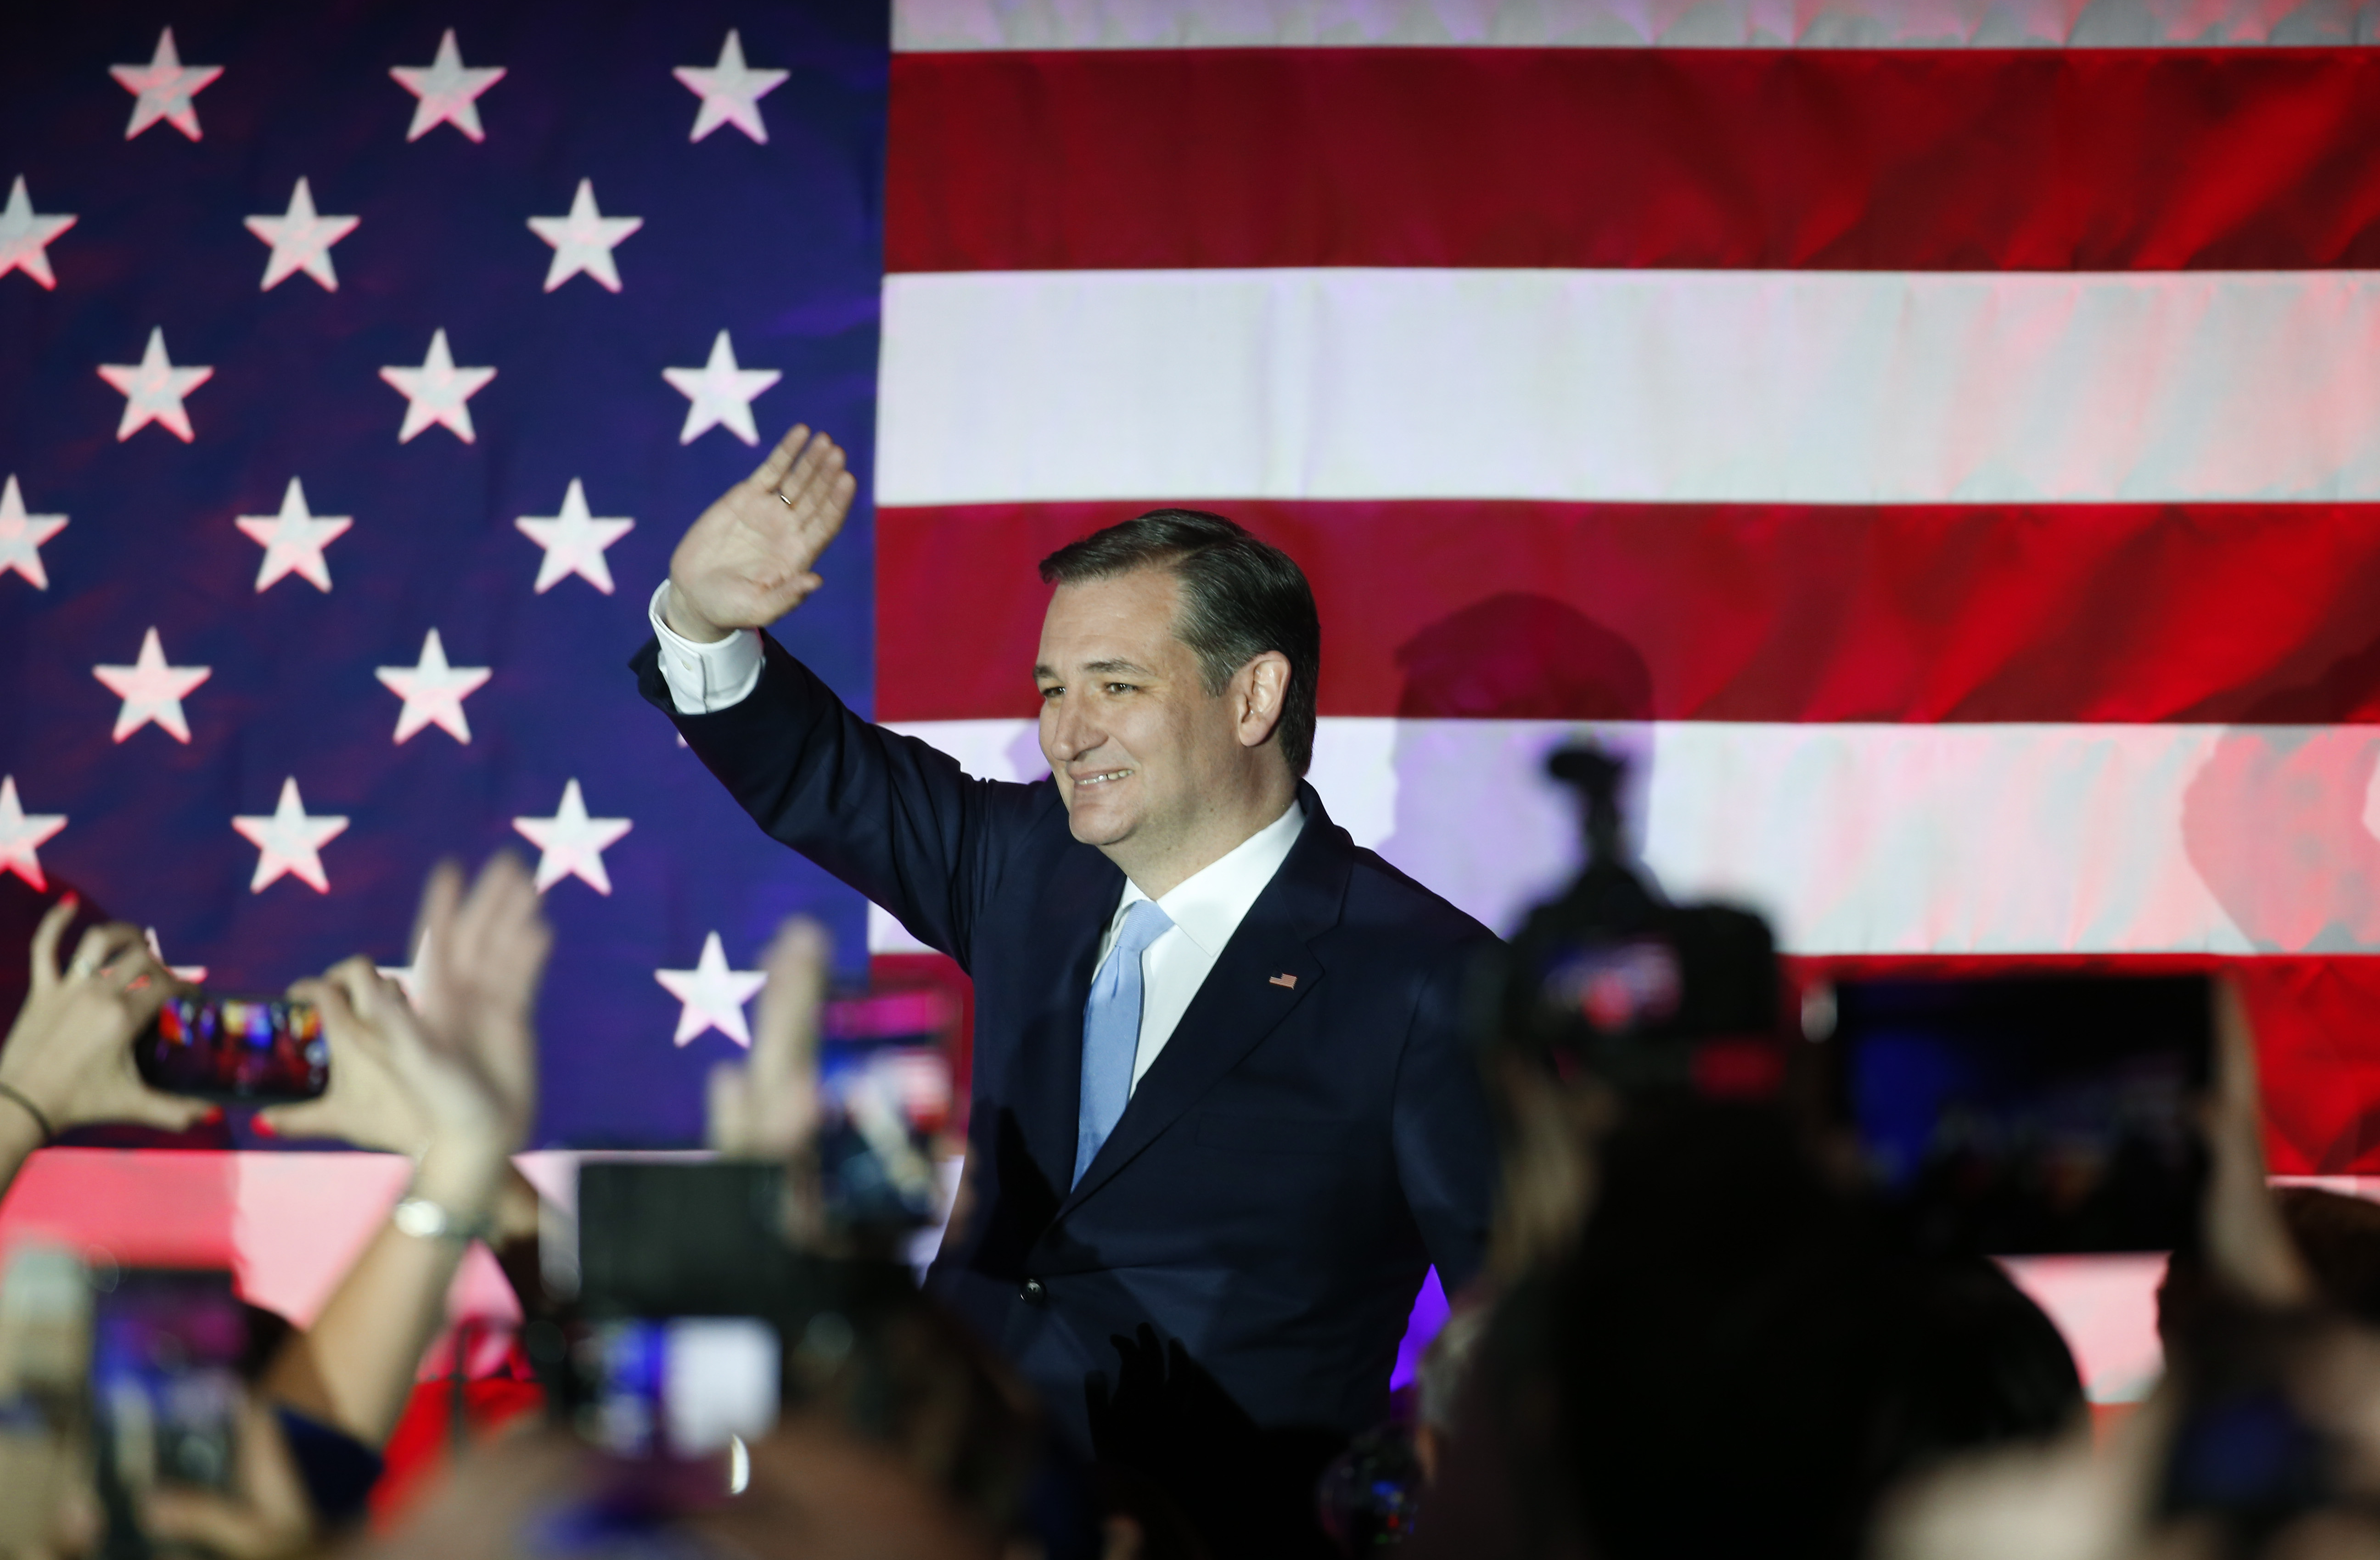 Ted Cruz, the projected winner of the Wisconsin Republican primary, at an event Tuesday night in Milwauke.